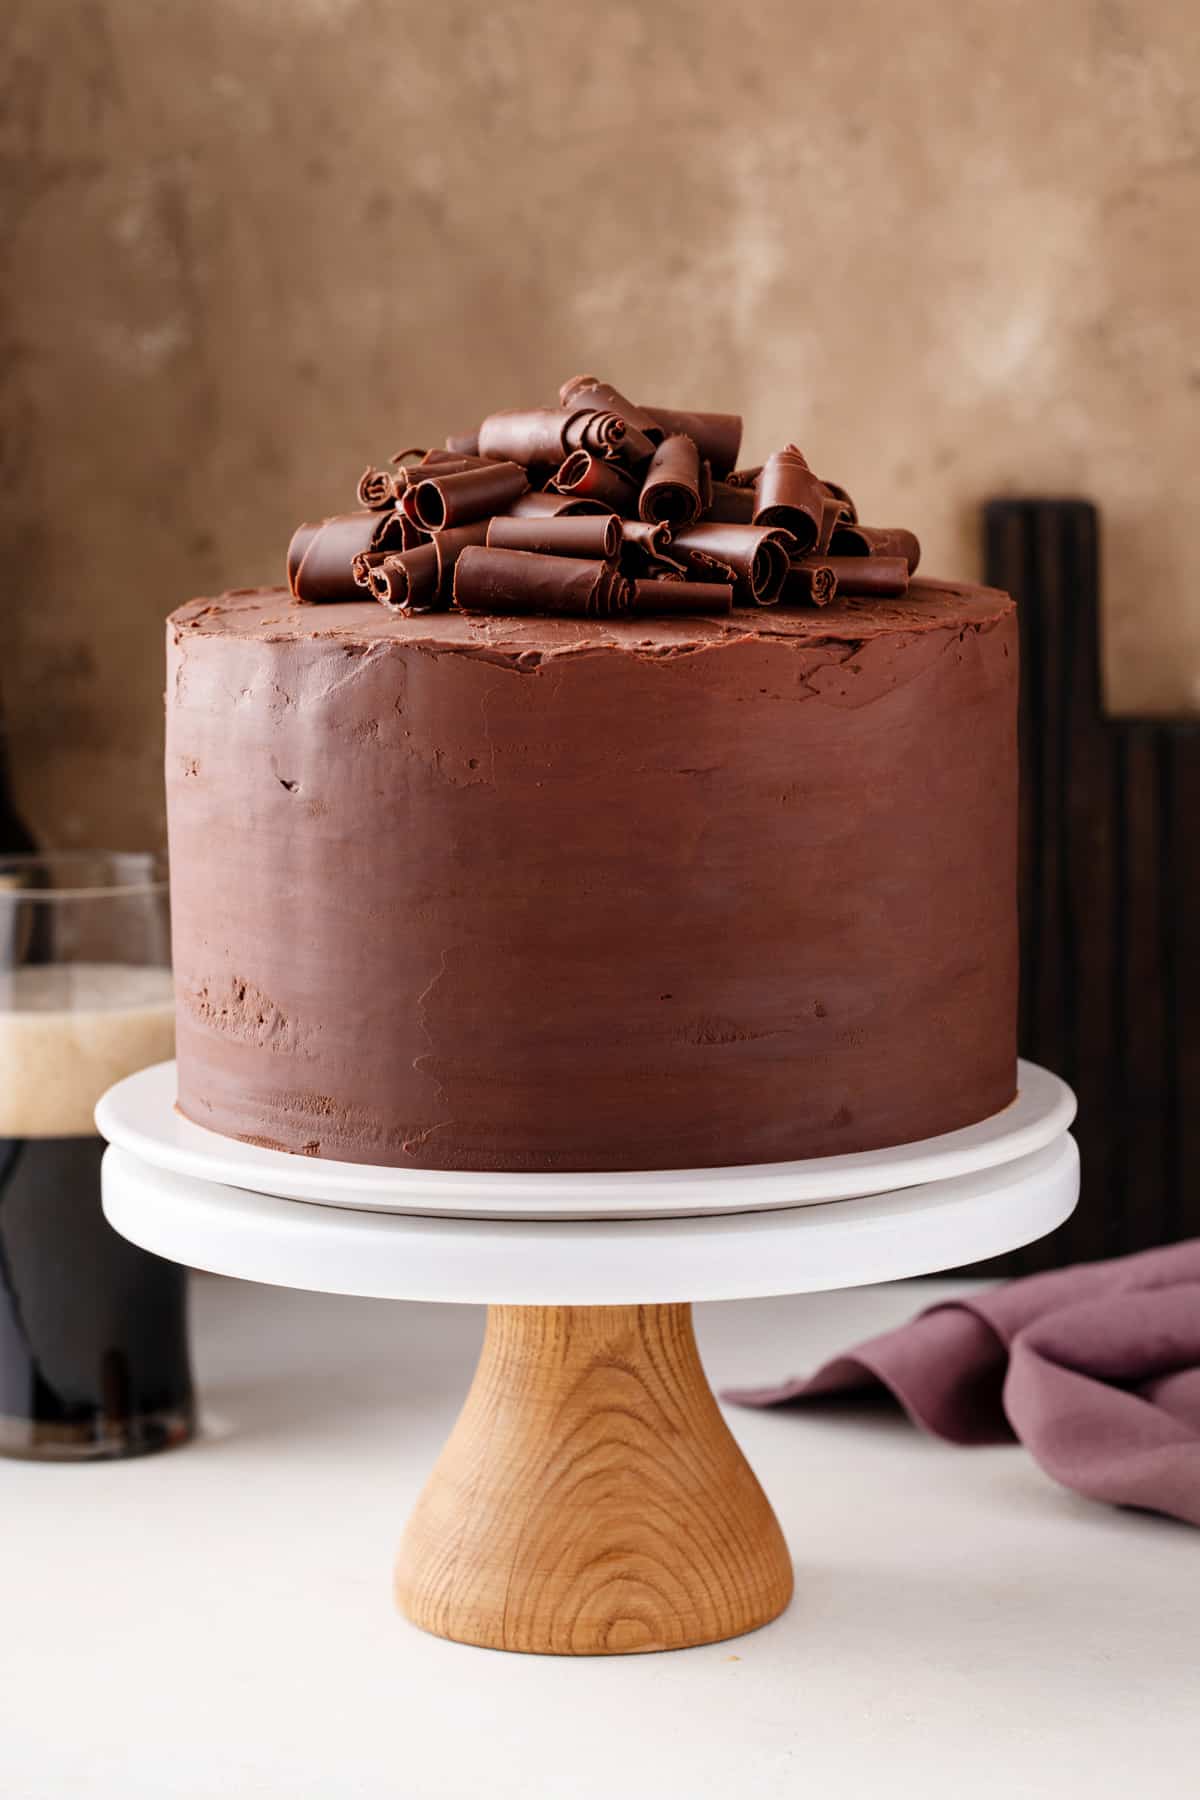 Chocolate guinness cake garnished with chocolate curls set on a cake stand.